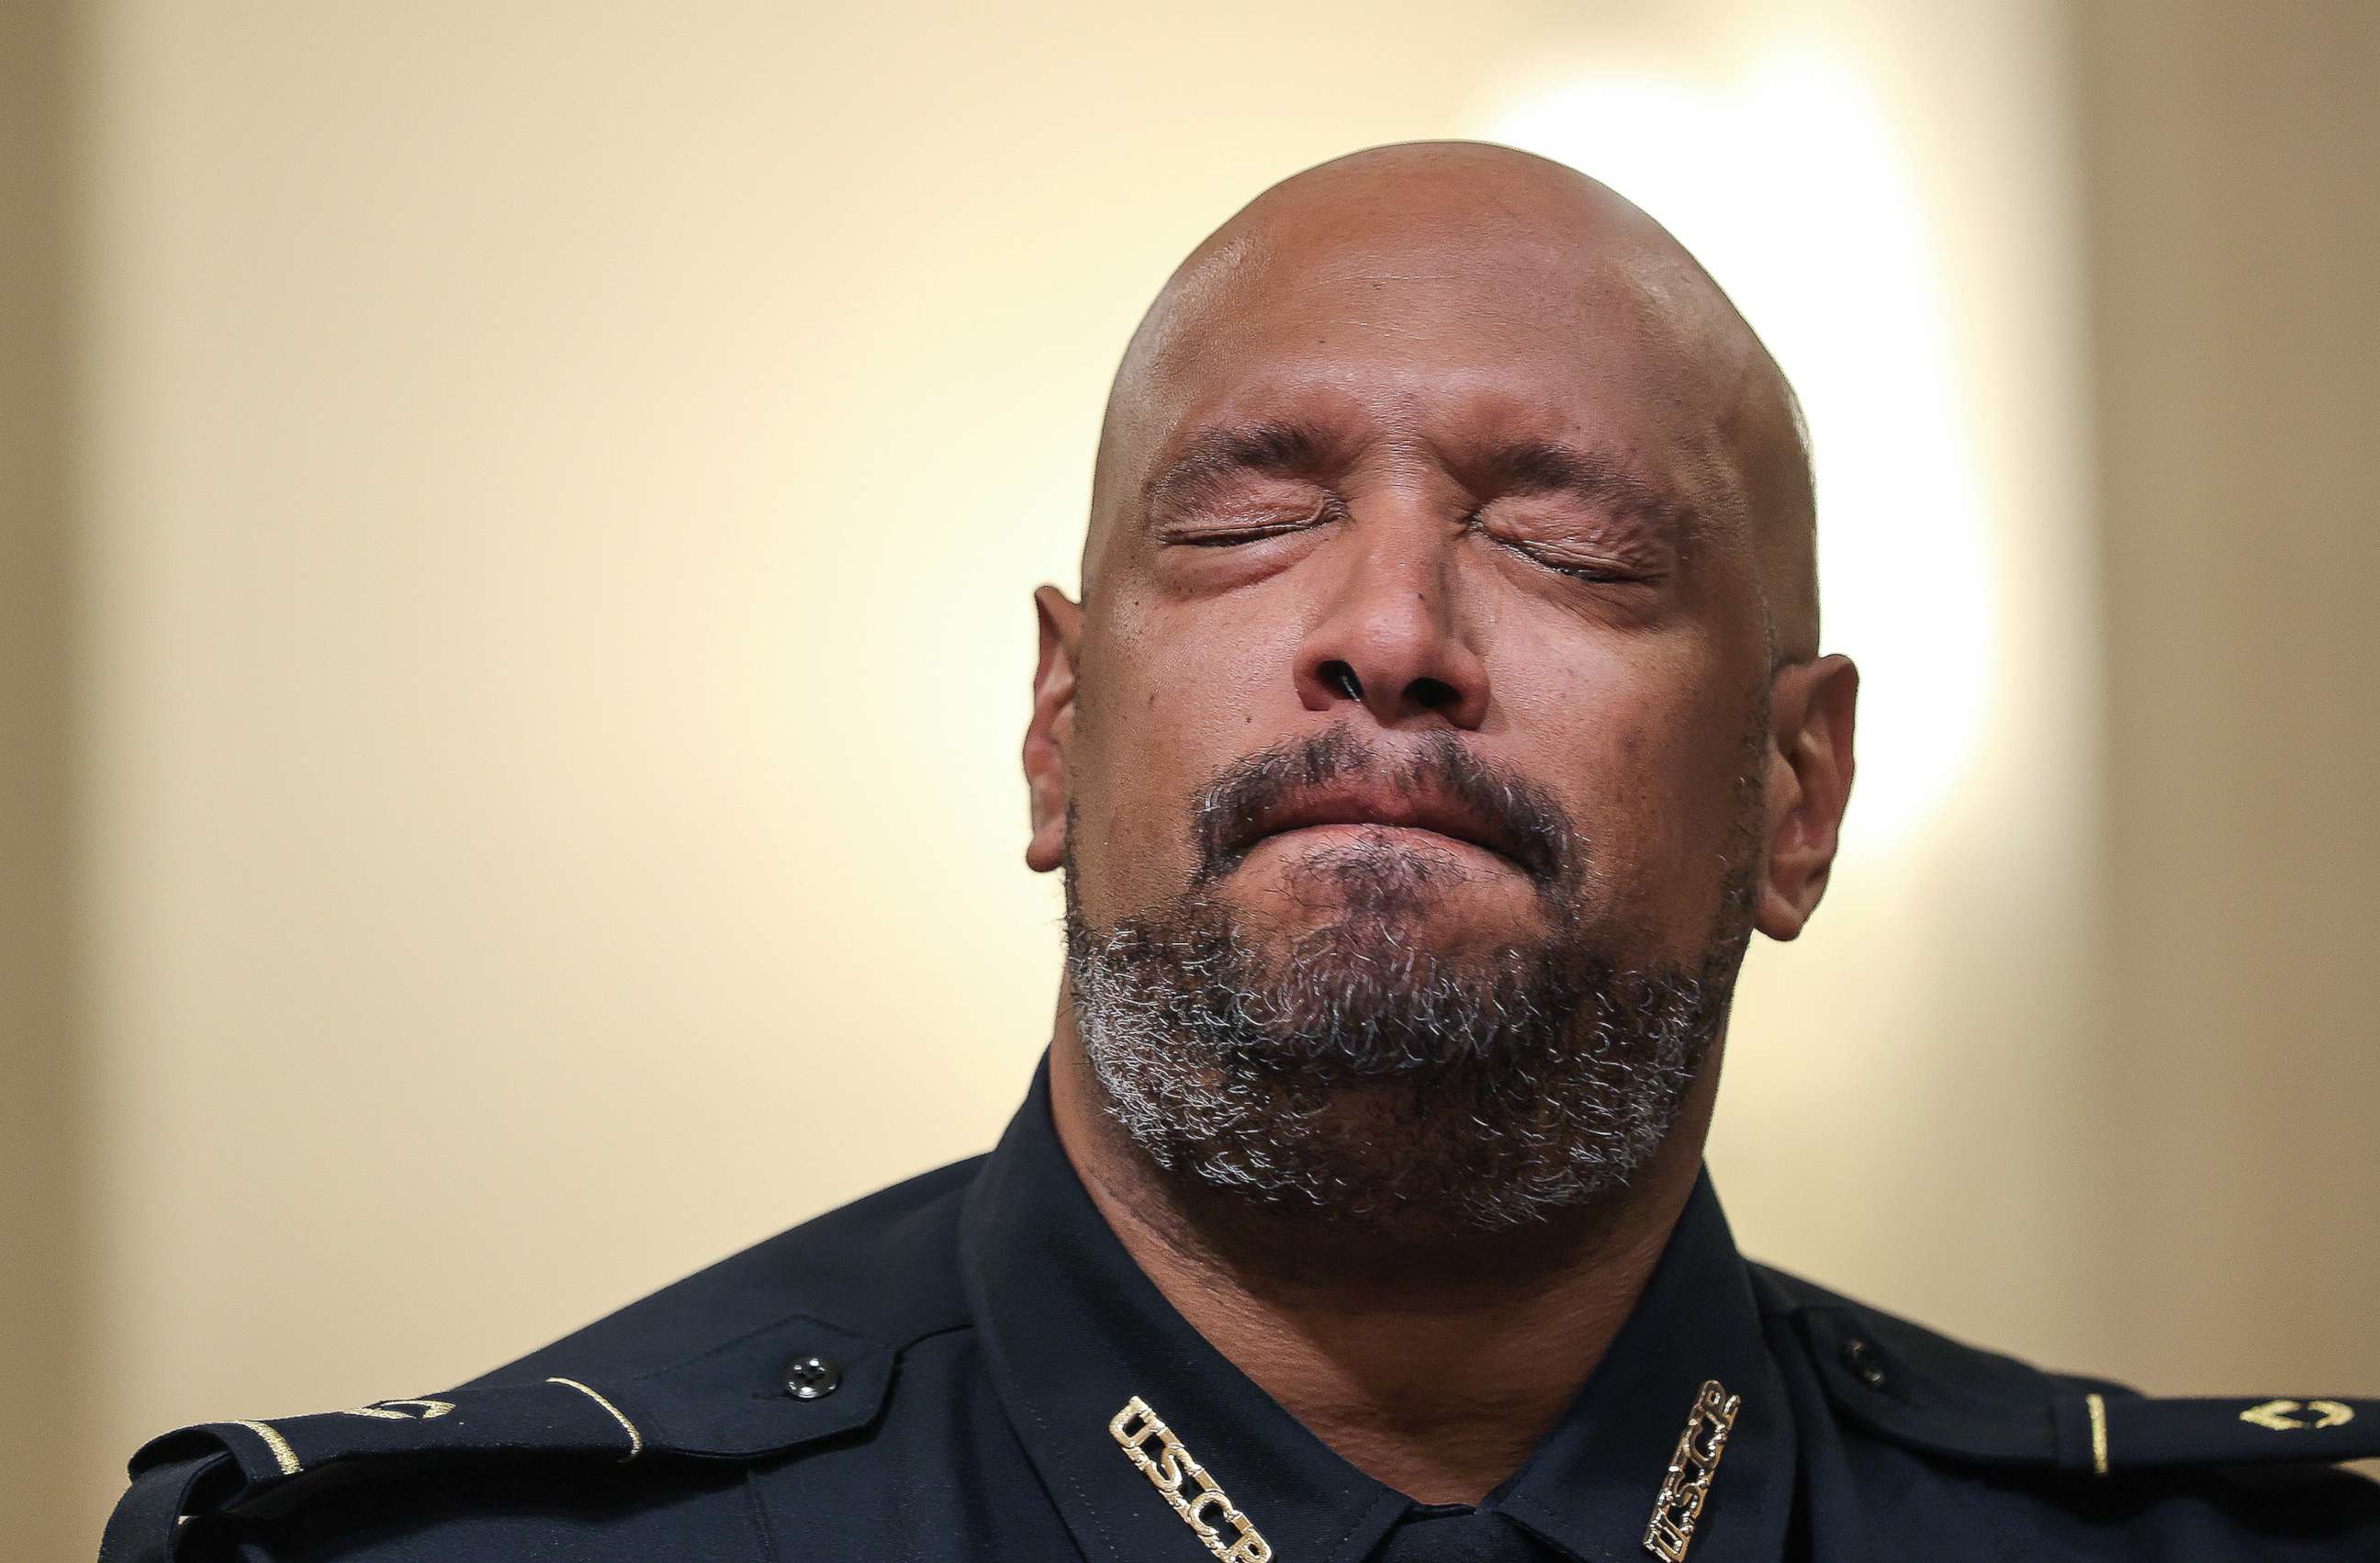 PHOTO: U.S. Capitol Police officer Harry Dunn becomes emotional as he testifies before the House Select Committee investigating the Jan. 6 attack on Capitol Hill in Washington, D.C., July 27, 2021.